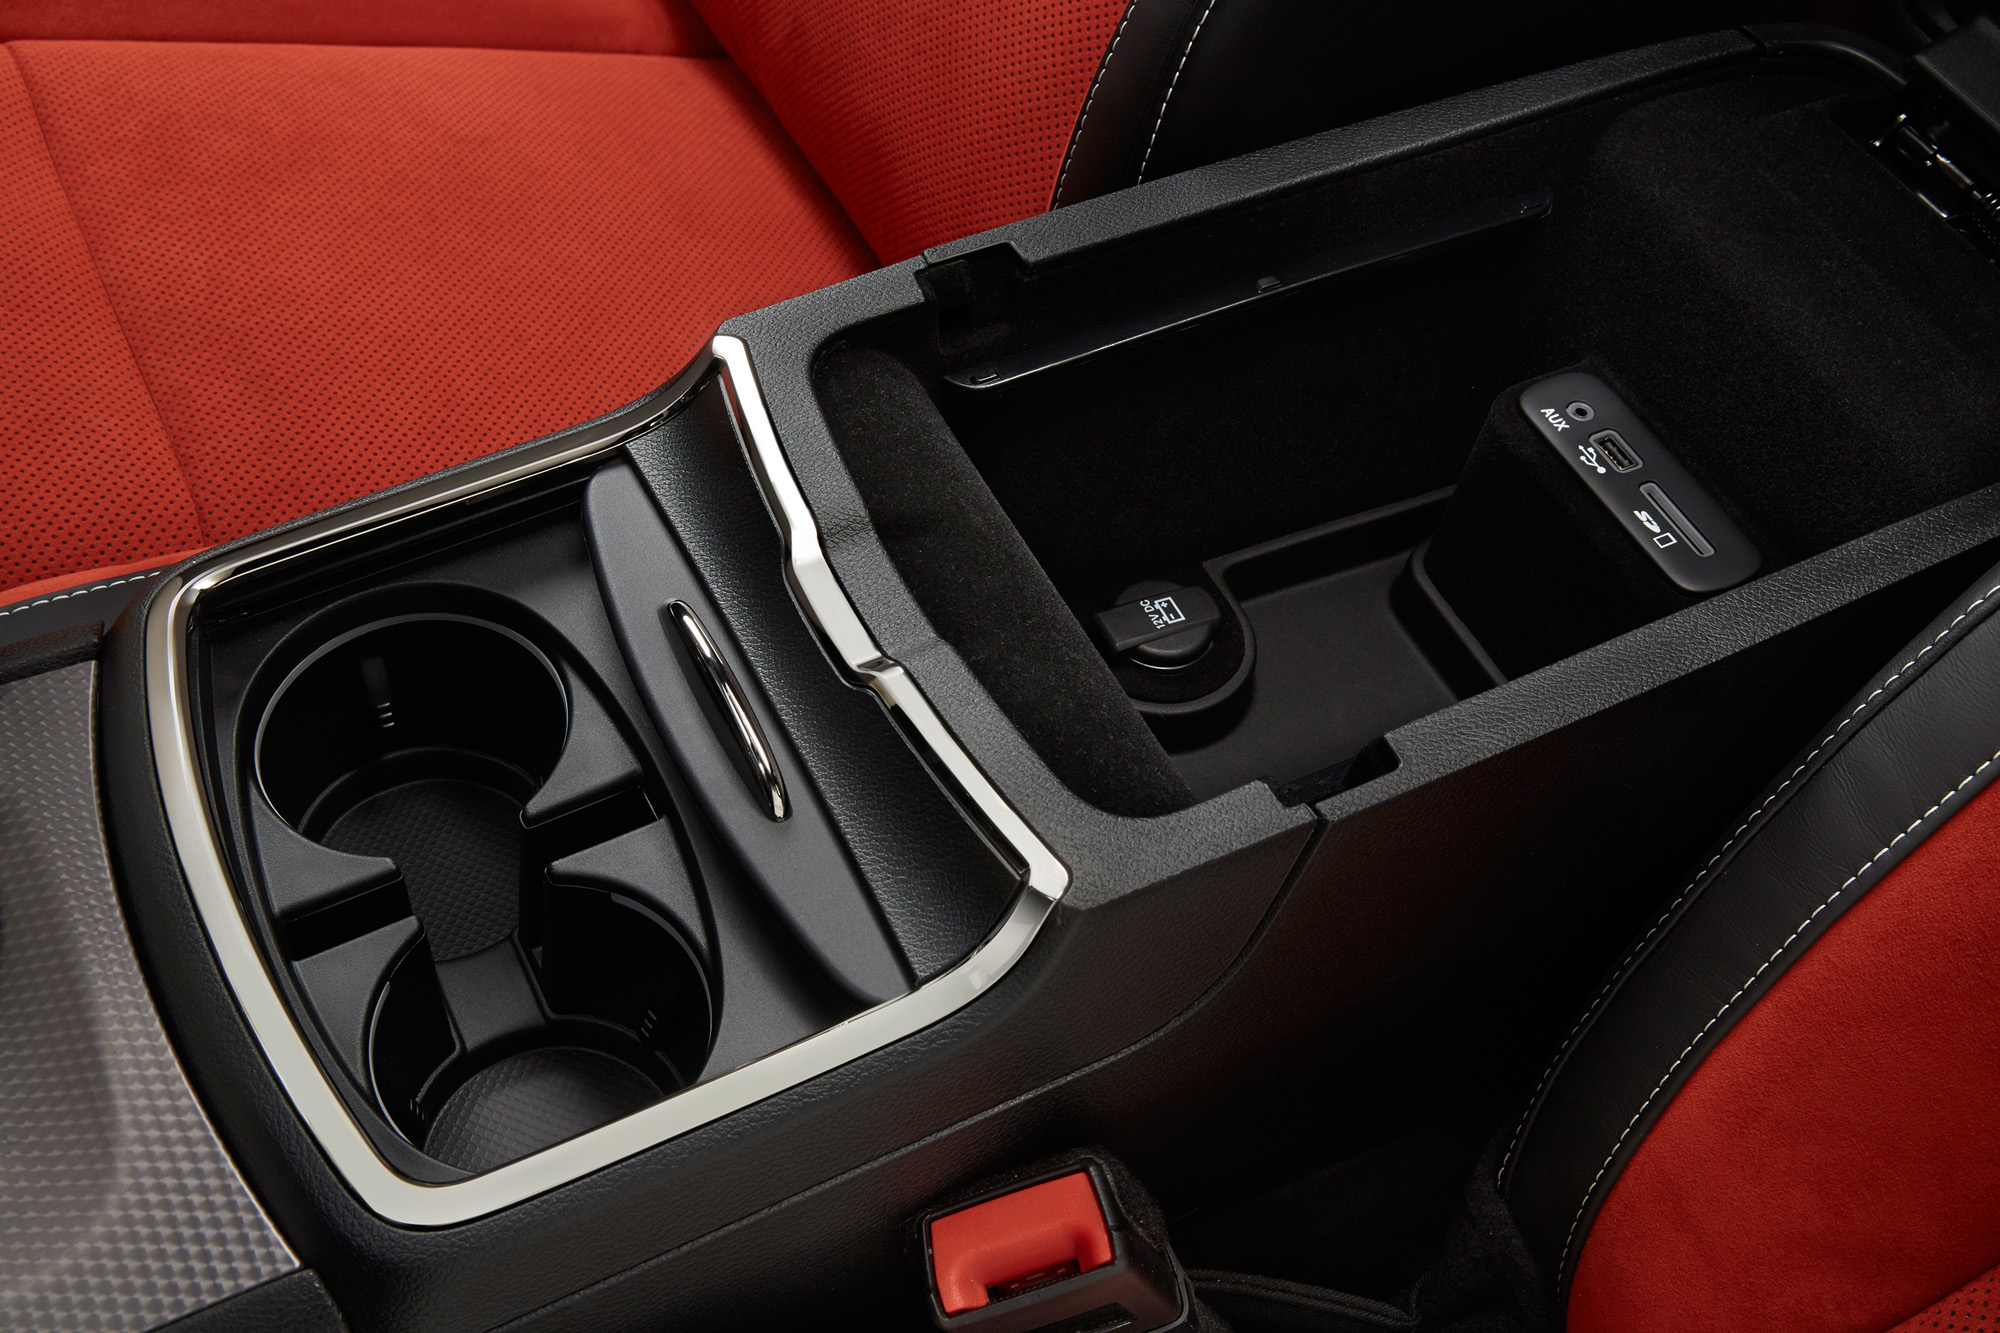 2015 Dodge Charger SRT Hellcat - center cupholders with center c